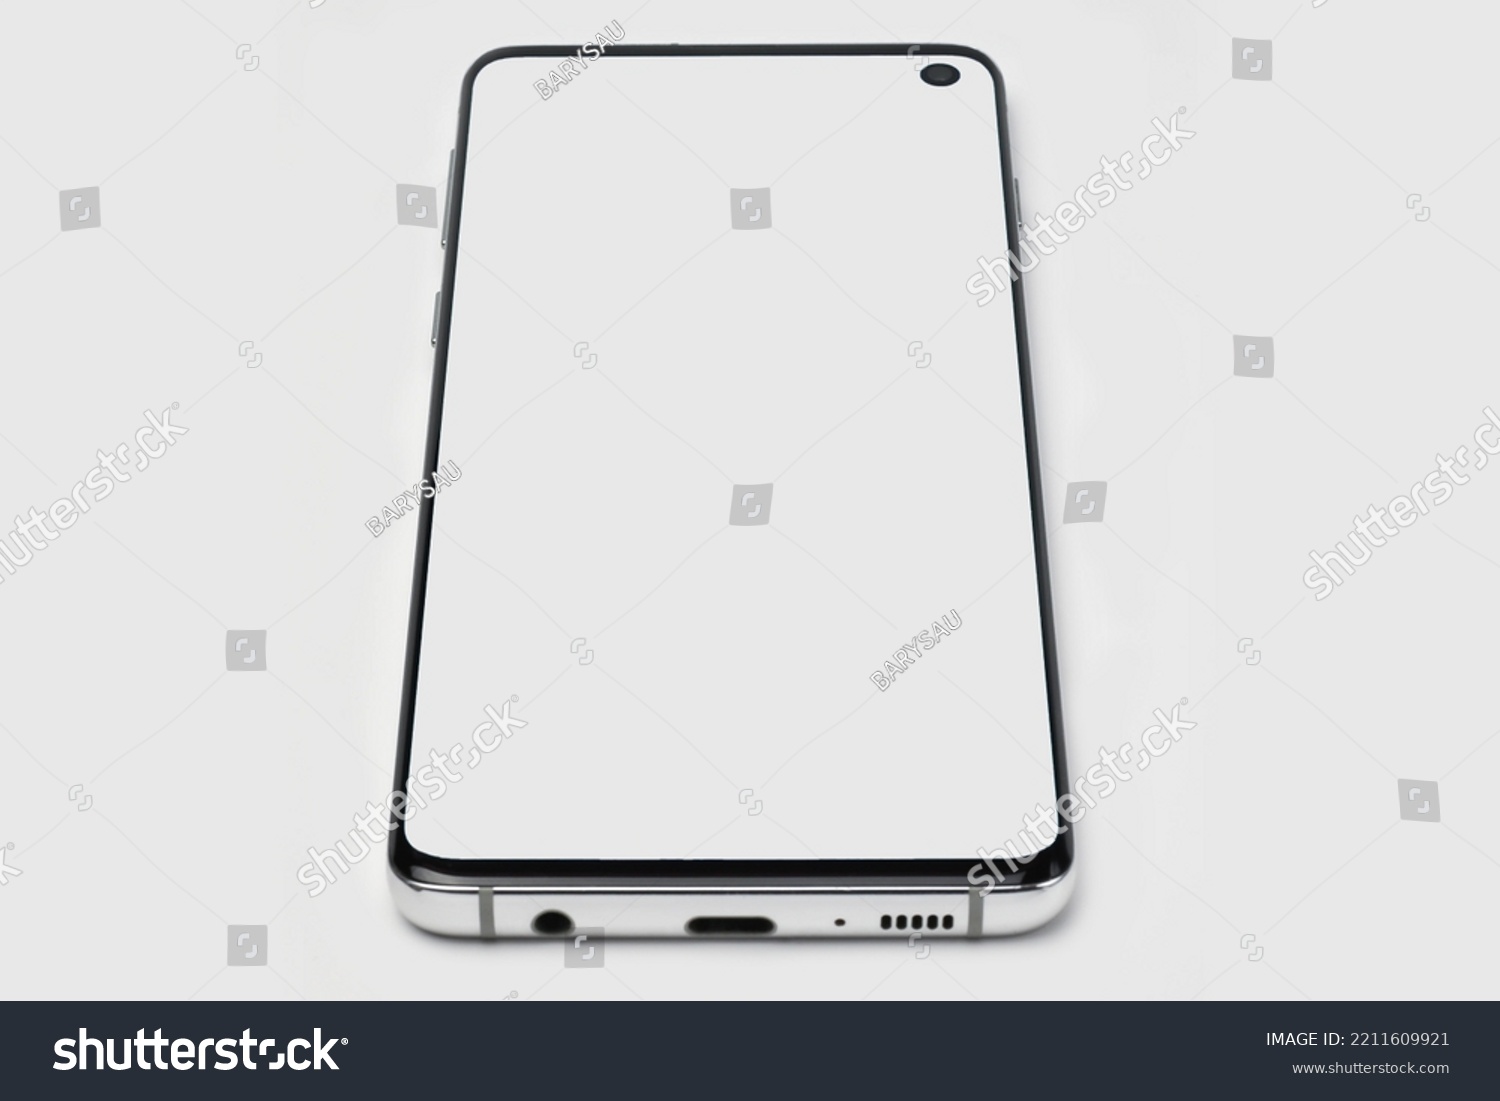 Smartphone with a white display on a white isolated background. Copyspace #2211609921